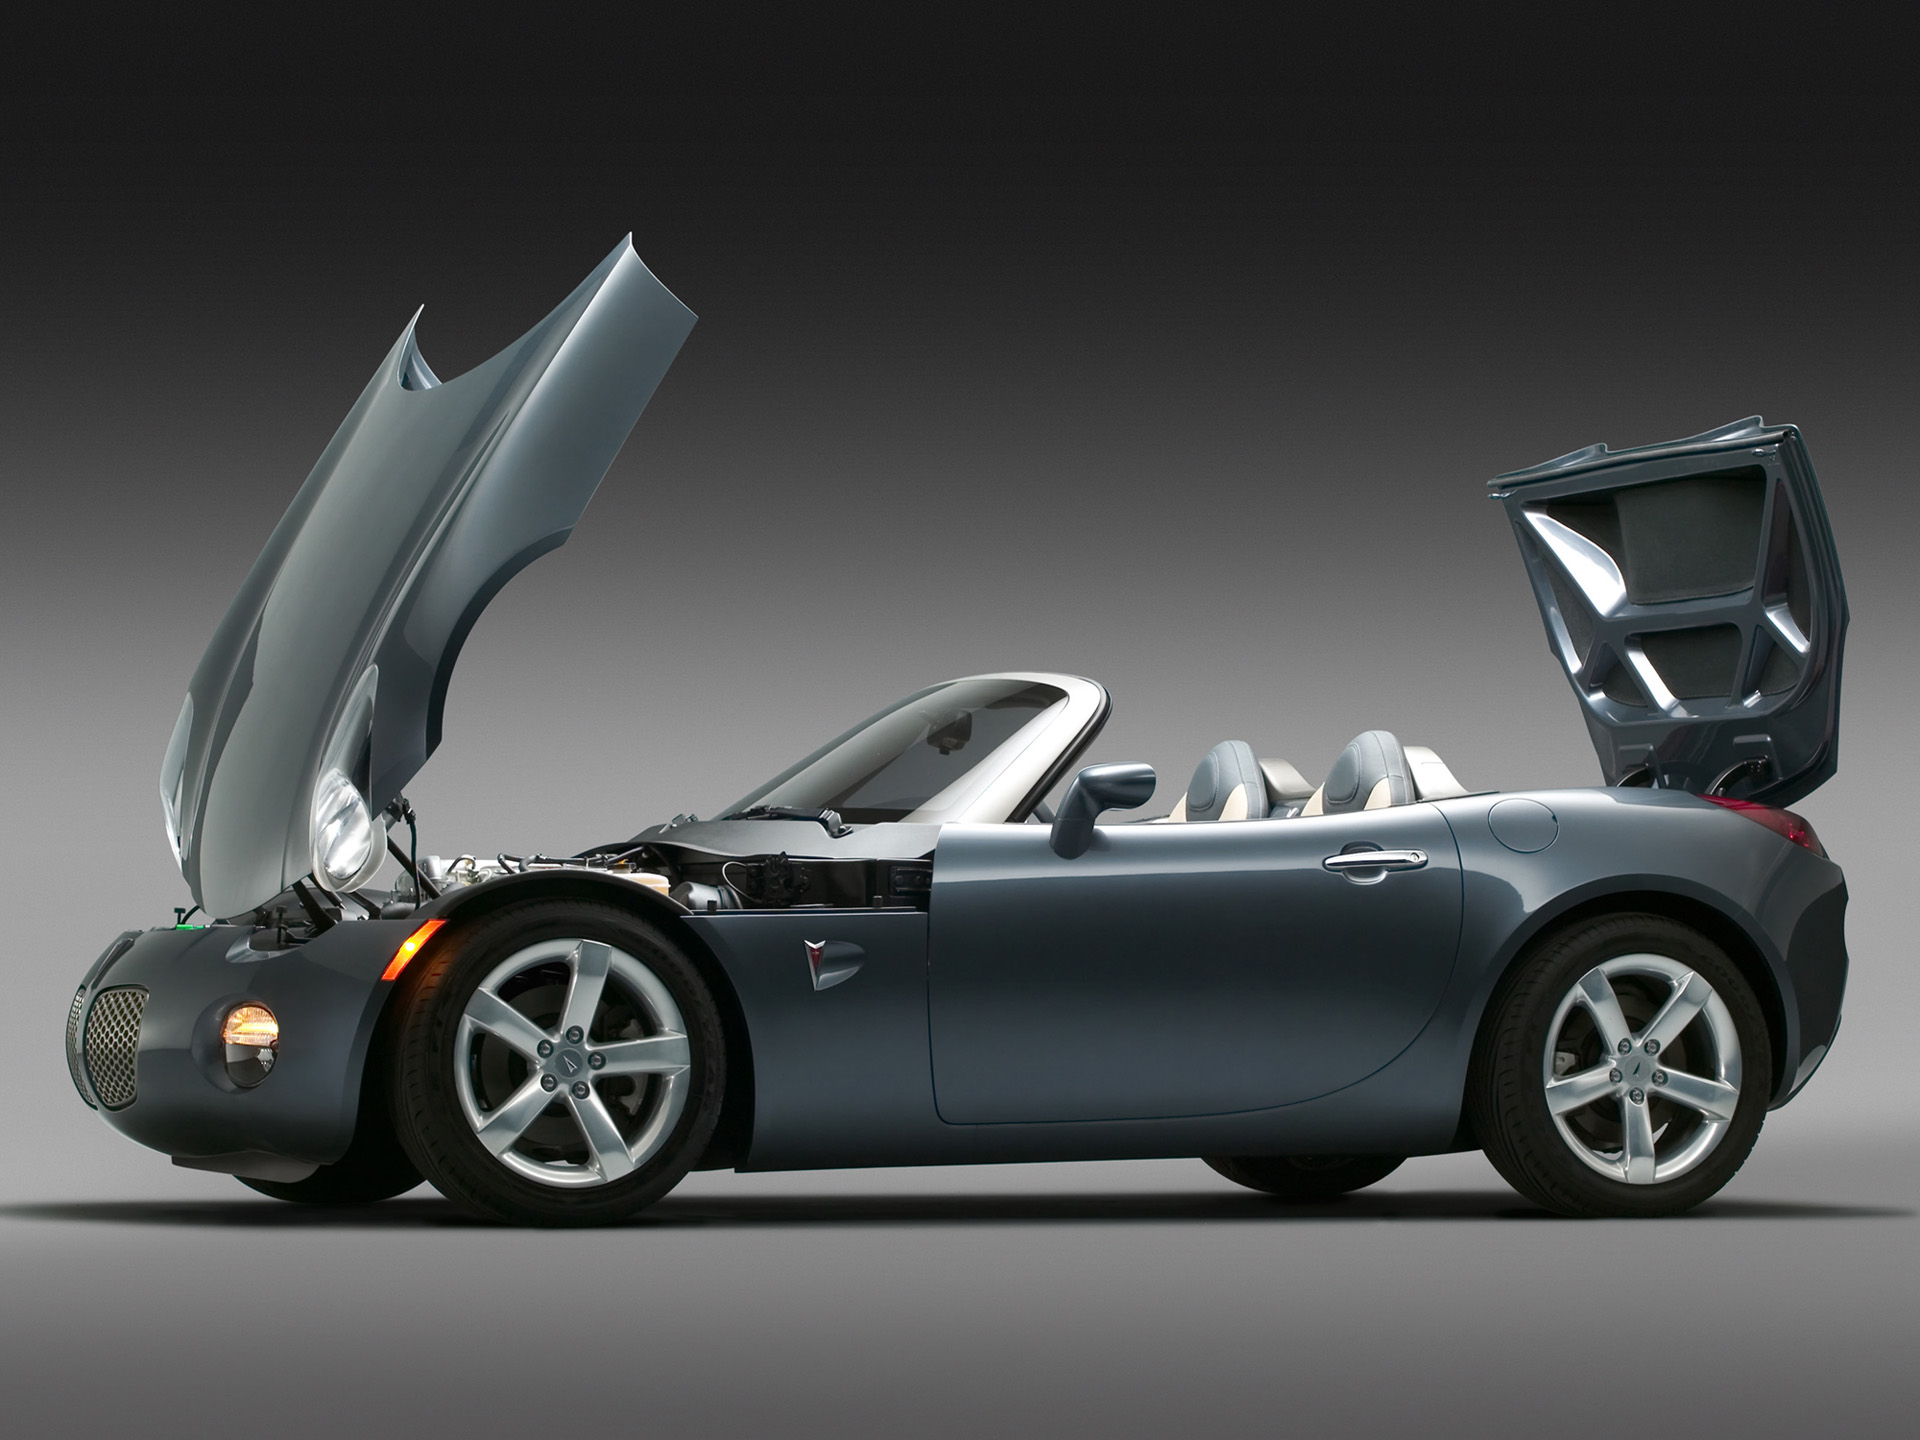 Download Pontiac Solstice photo #43169) You can use this pic as wallpaper (...